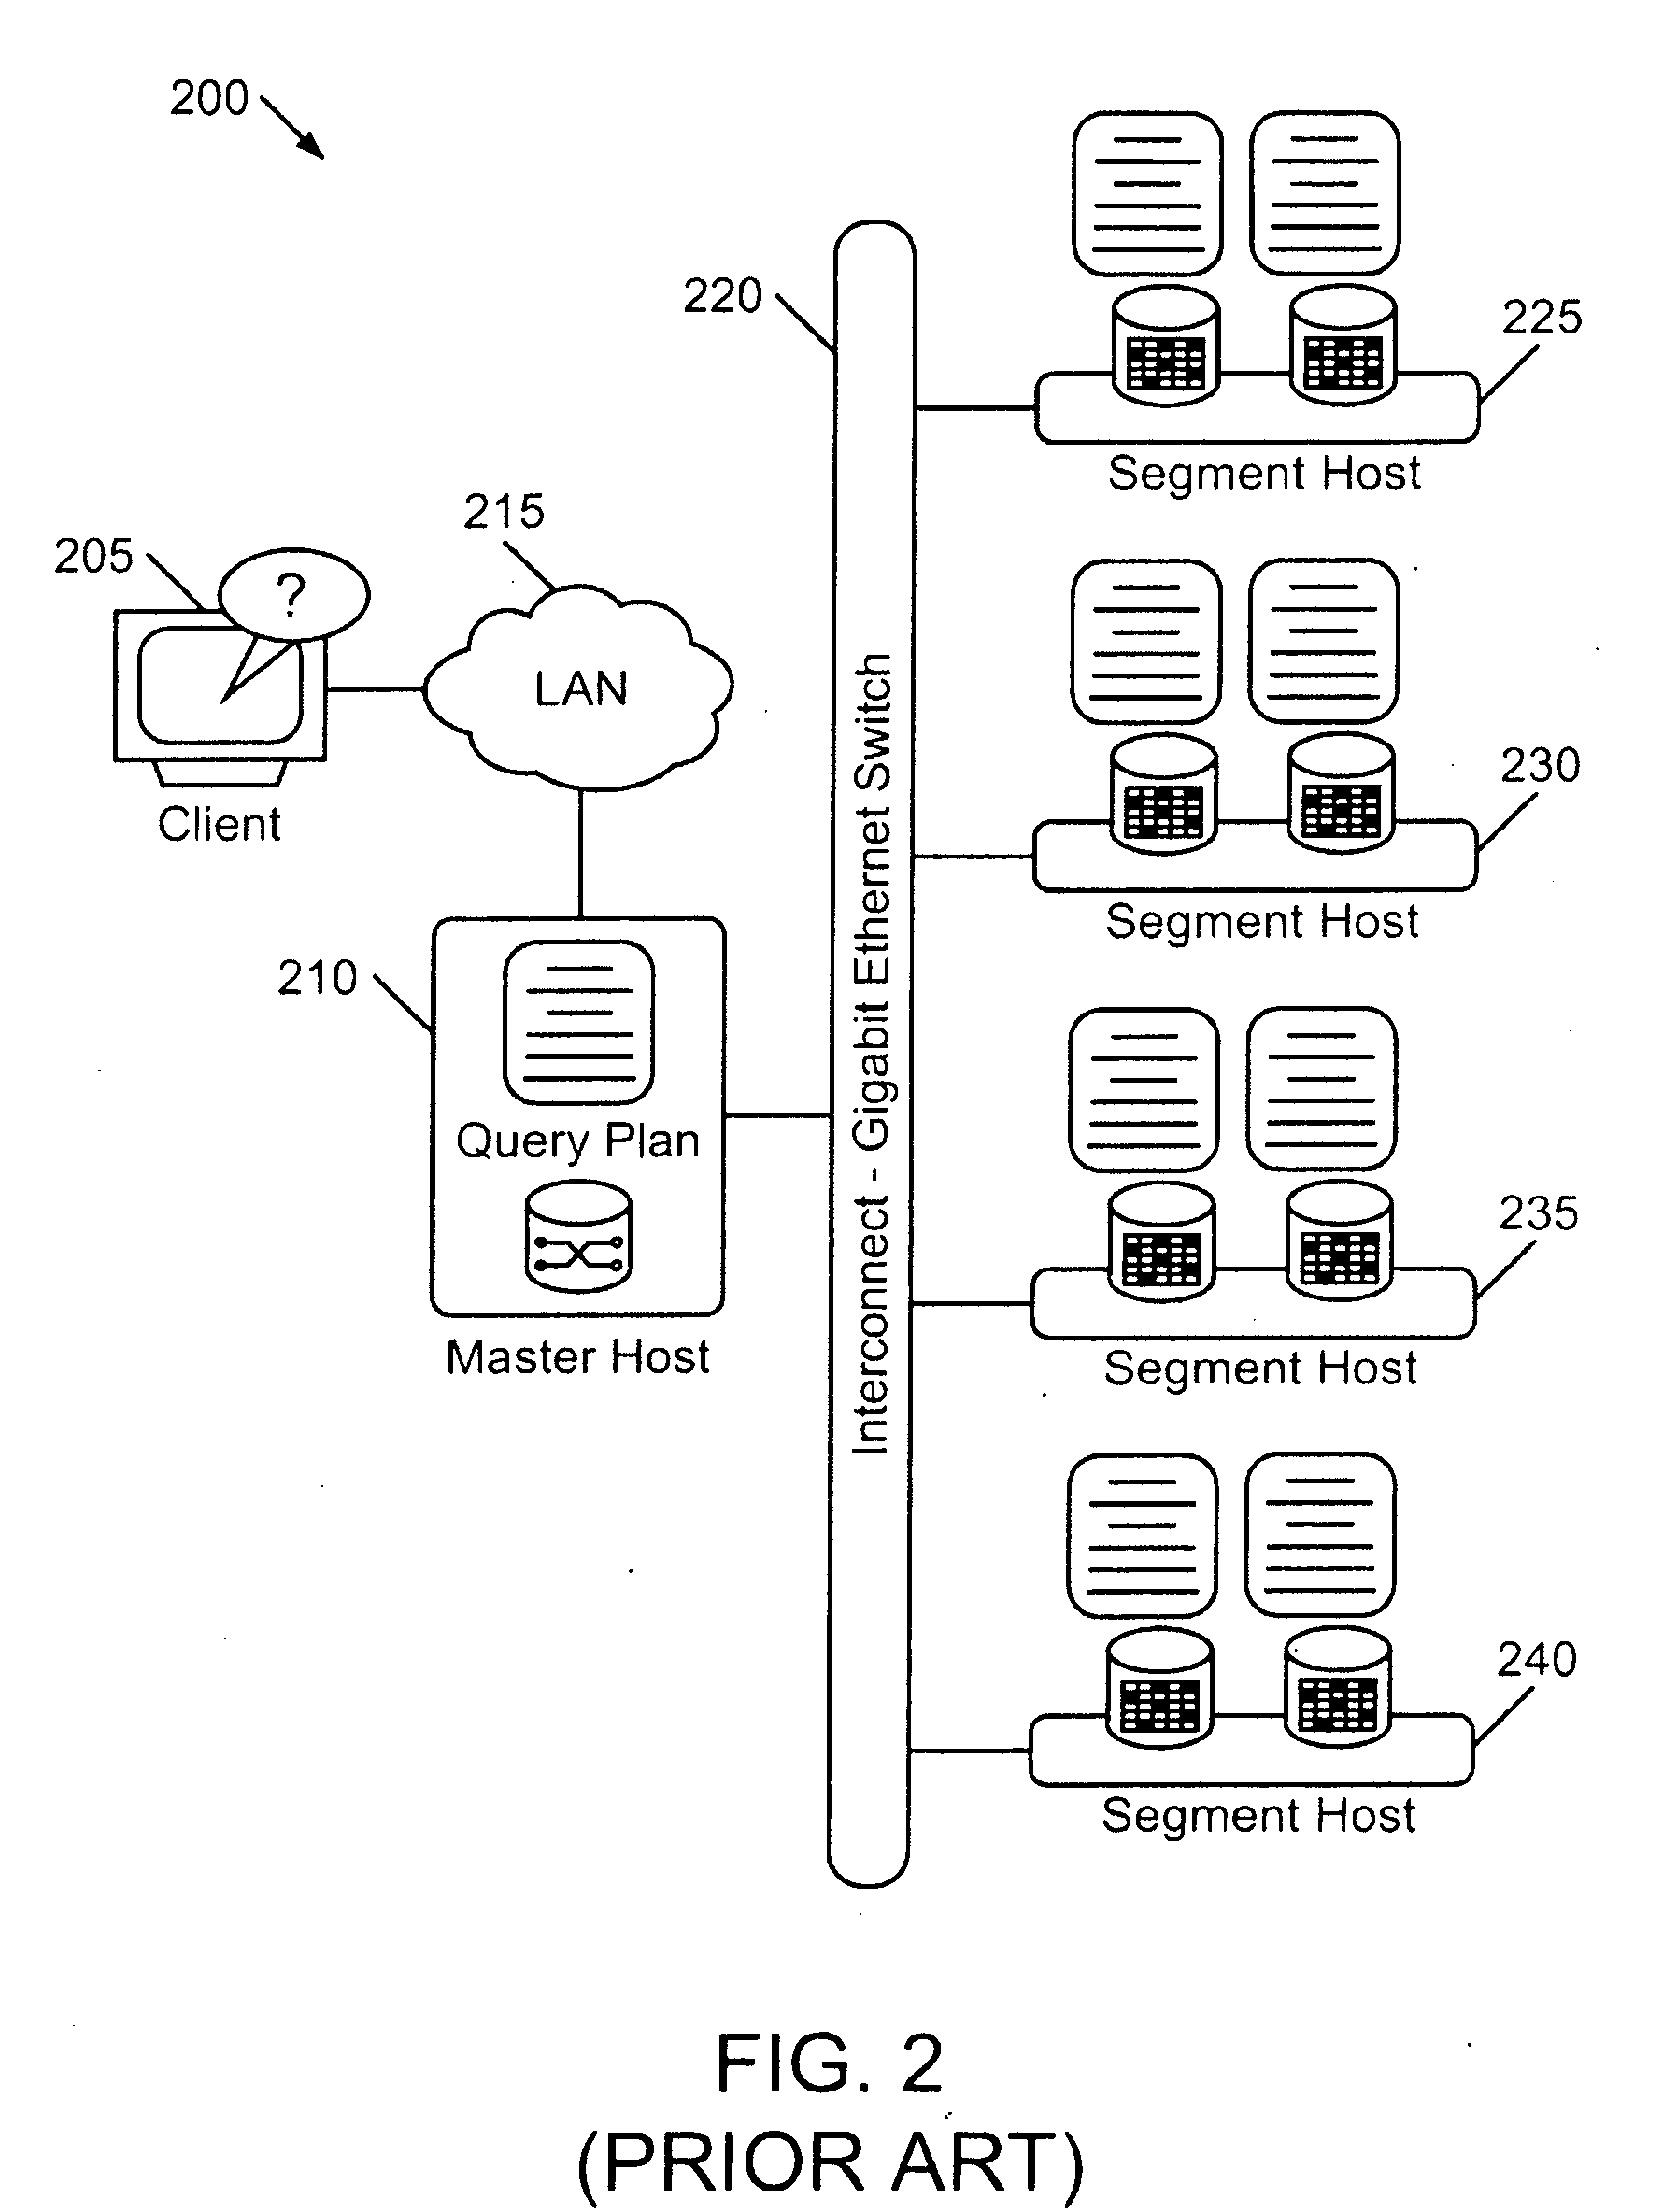 Apparatus and method for integrating map-reduce into a distributed relational database